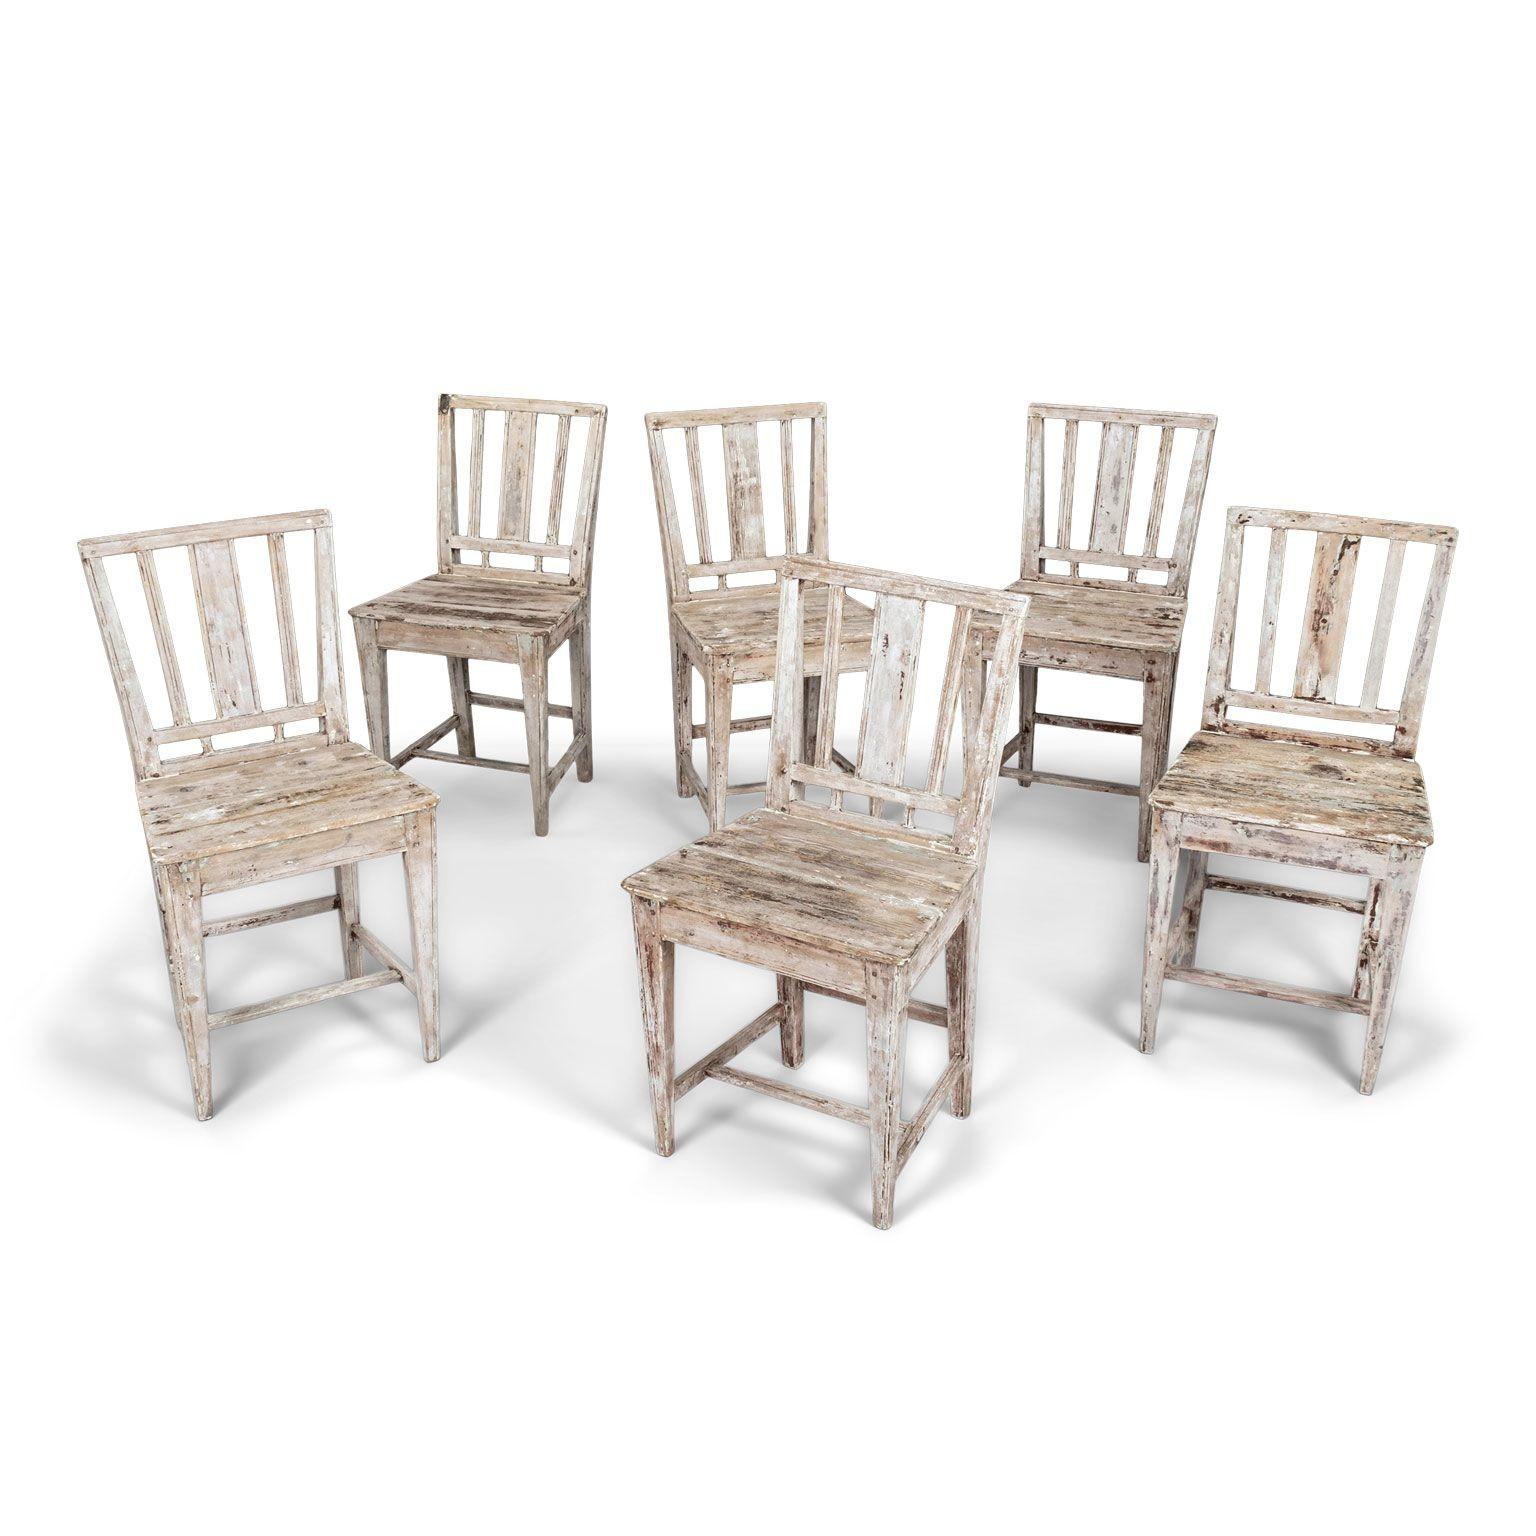 Set of six early 19th century painted Swedish farm dining chairs circa 1810-1829. Sturdy, stable. All joints tightened. No wobble. Remnants of old and early paint. Interesting steel repair on the upper back of one chair. Rustic neoclassical in